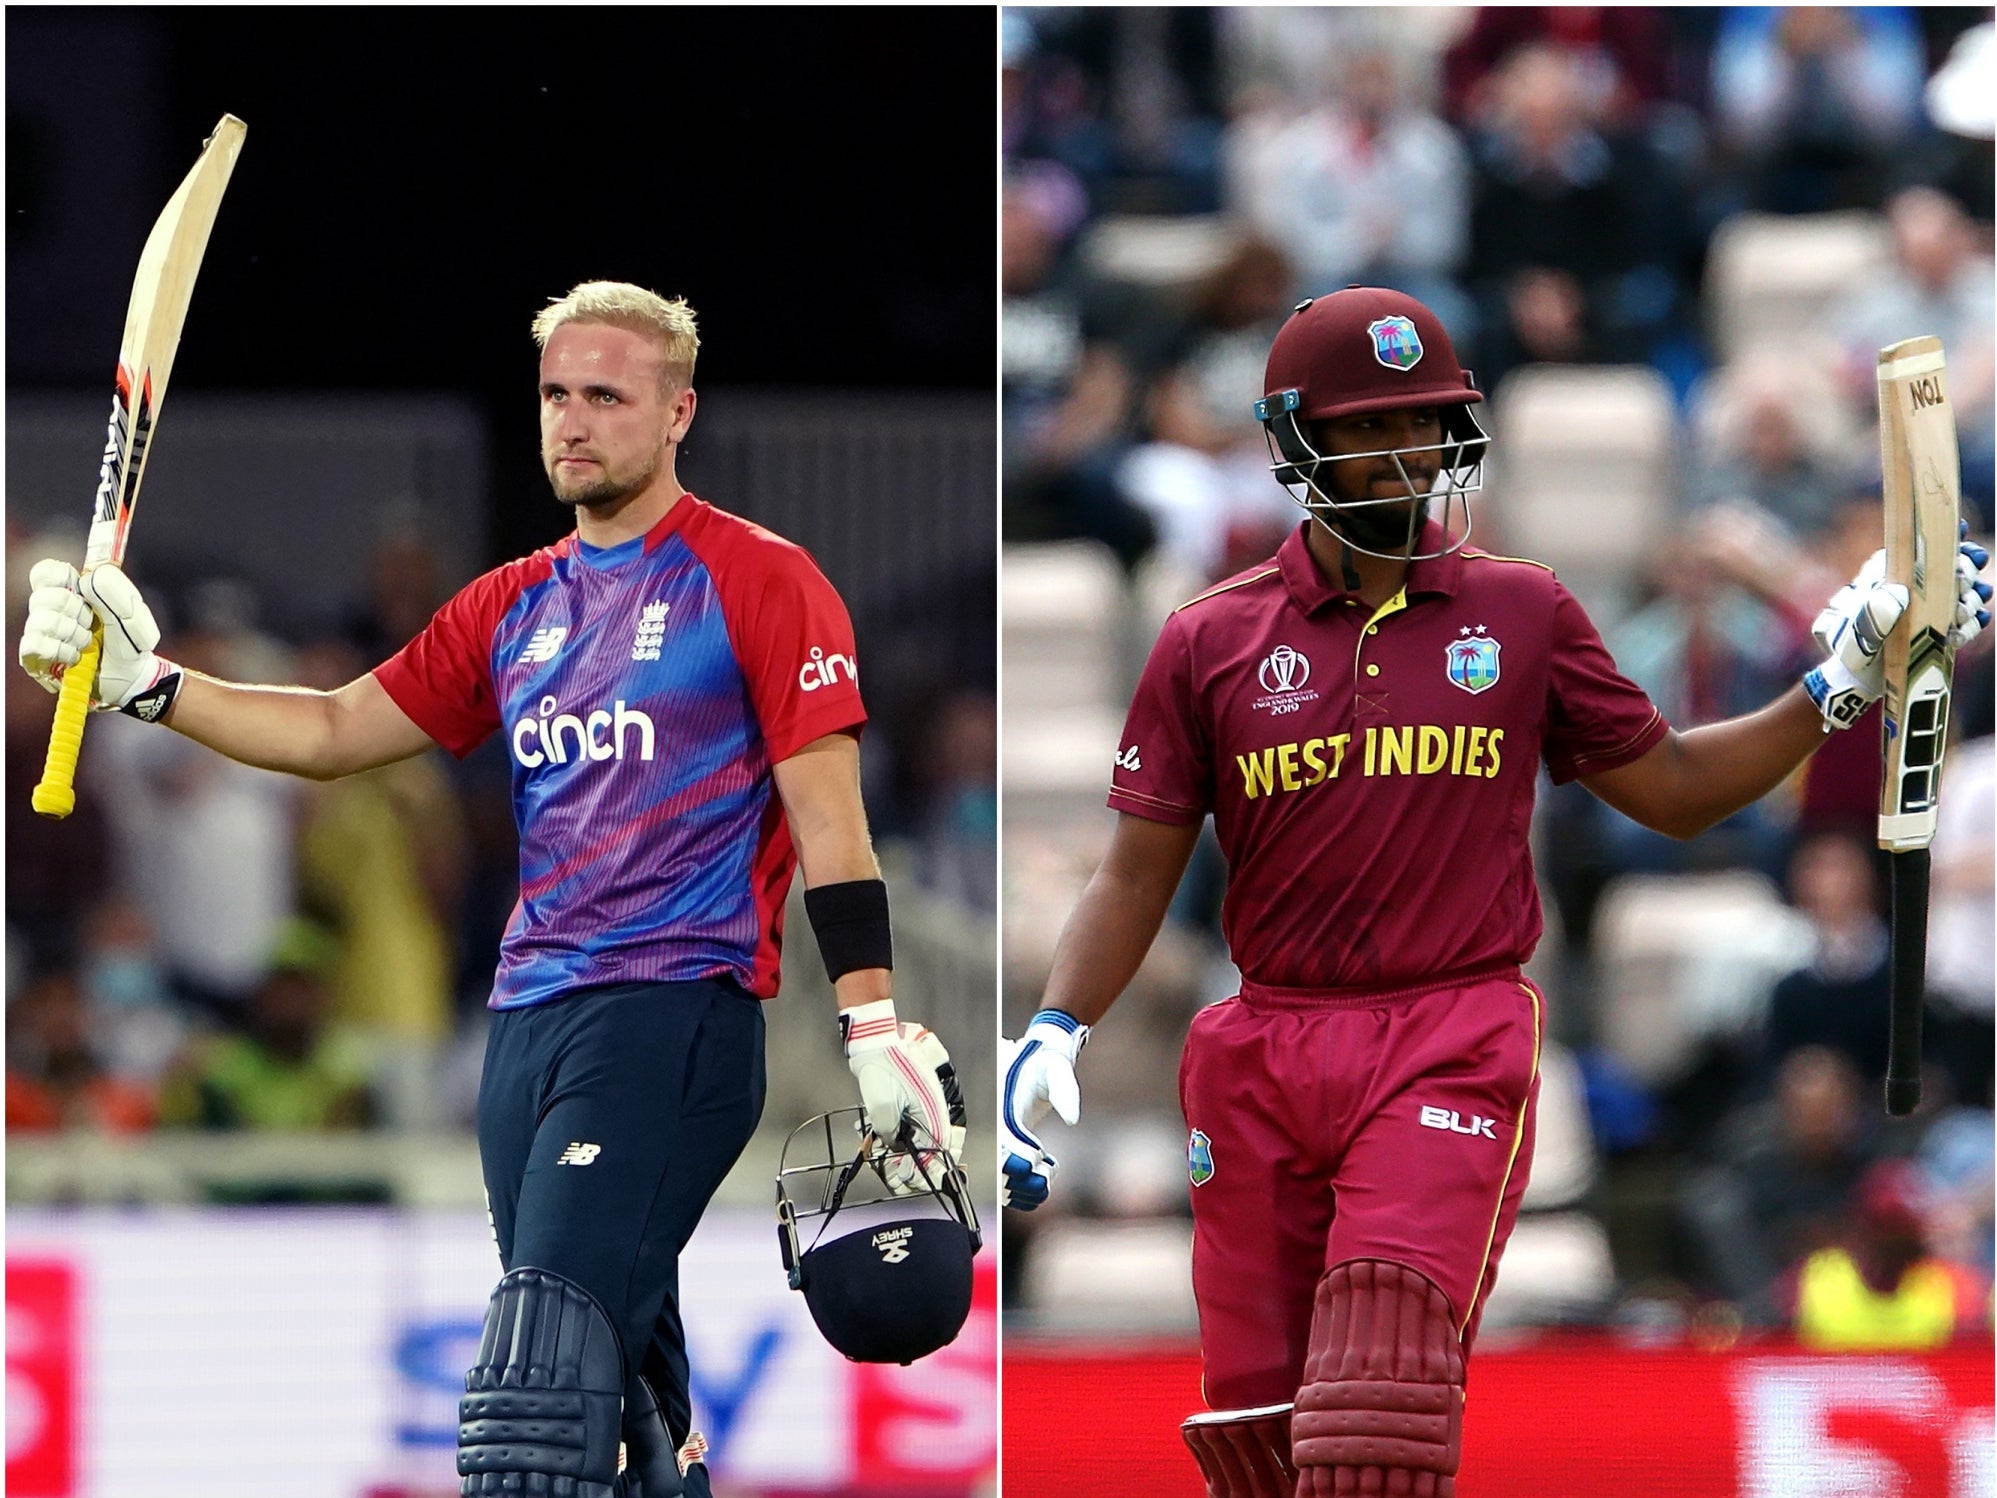 Liam Livingstone and Nicholas Pooran could be among the players to watch at the Twenty20 World Cup (Zac Goodwin/Steven Paston/PA)